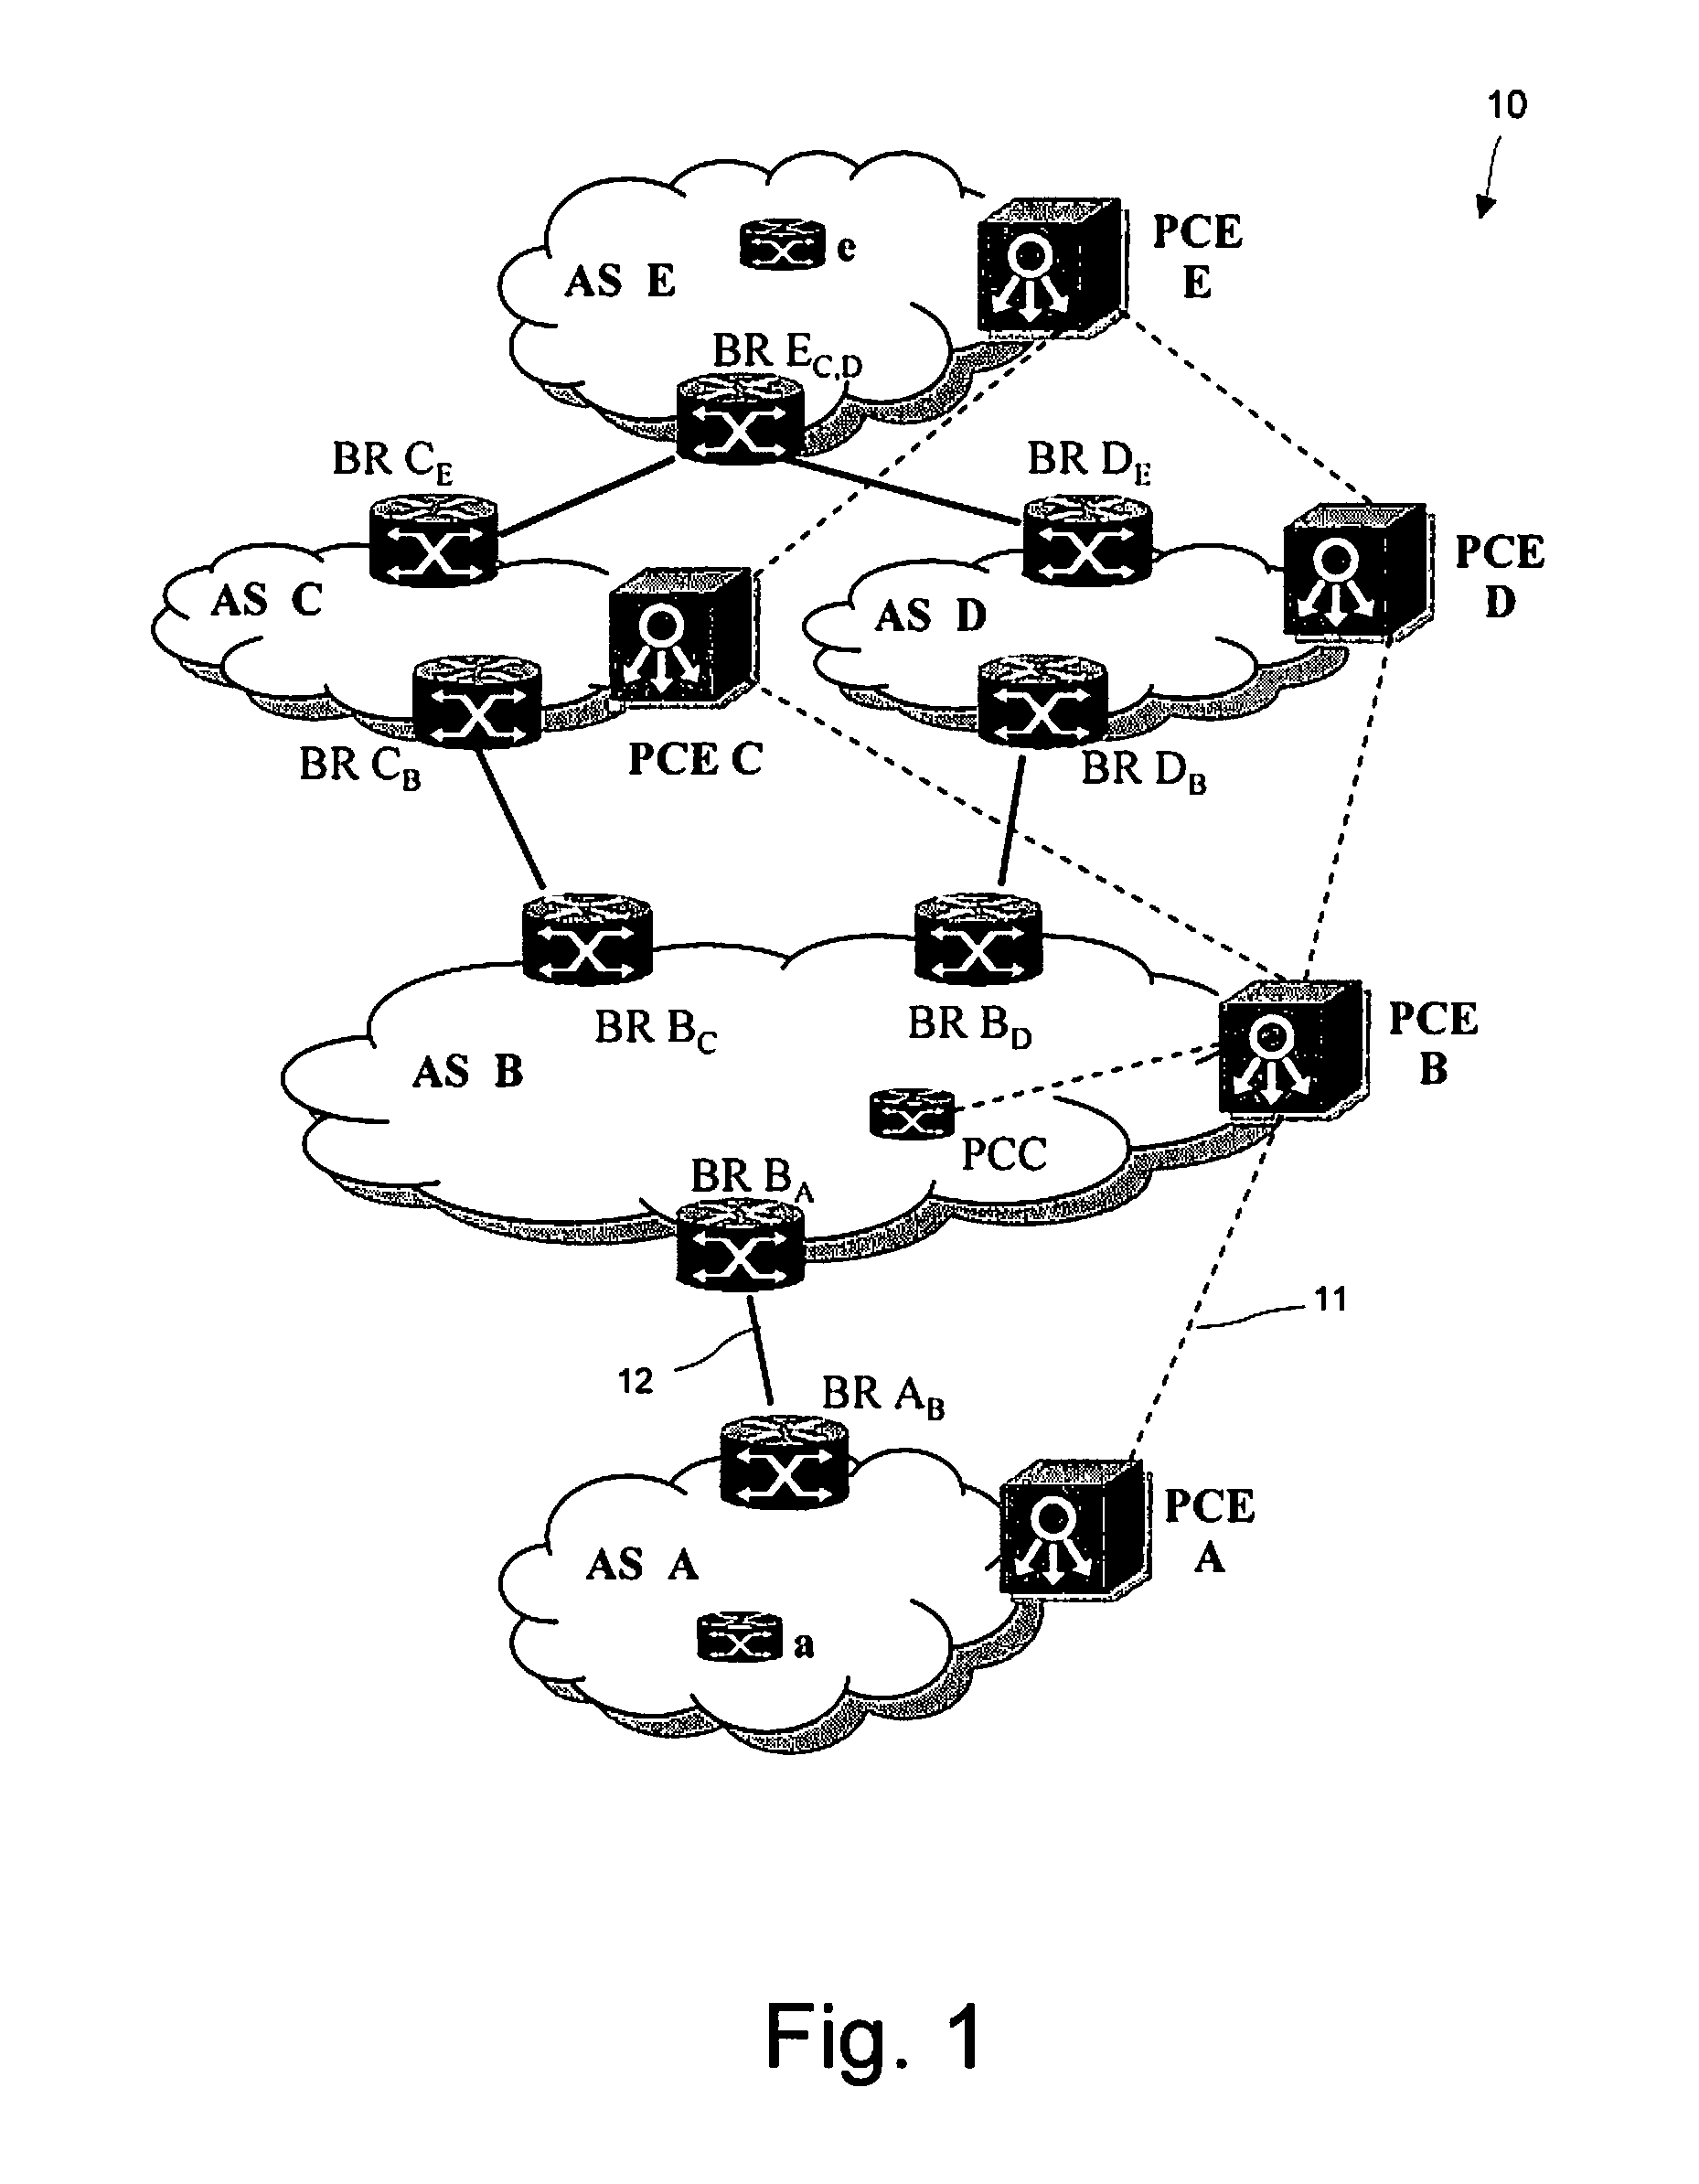 Inter-domain advertisements in multi-domain networks